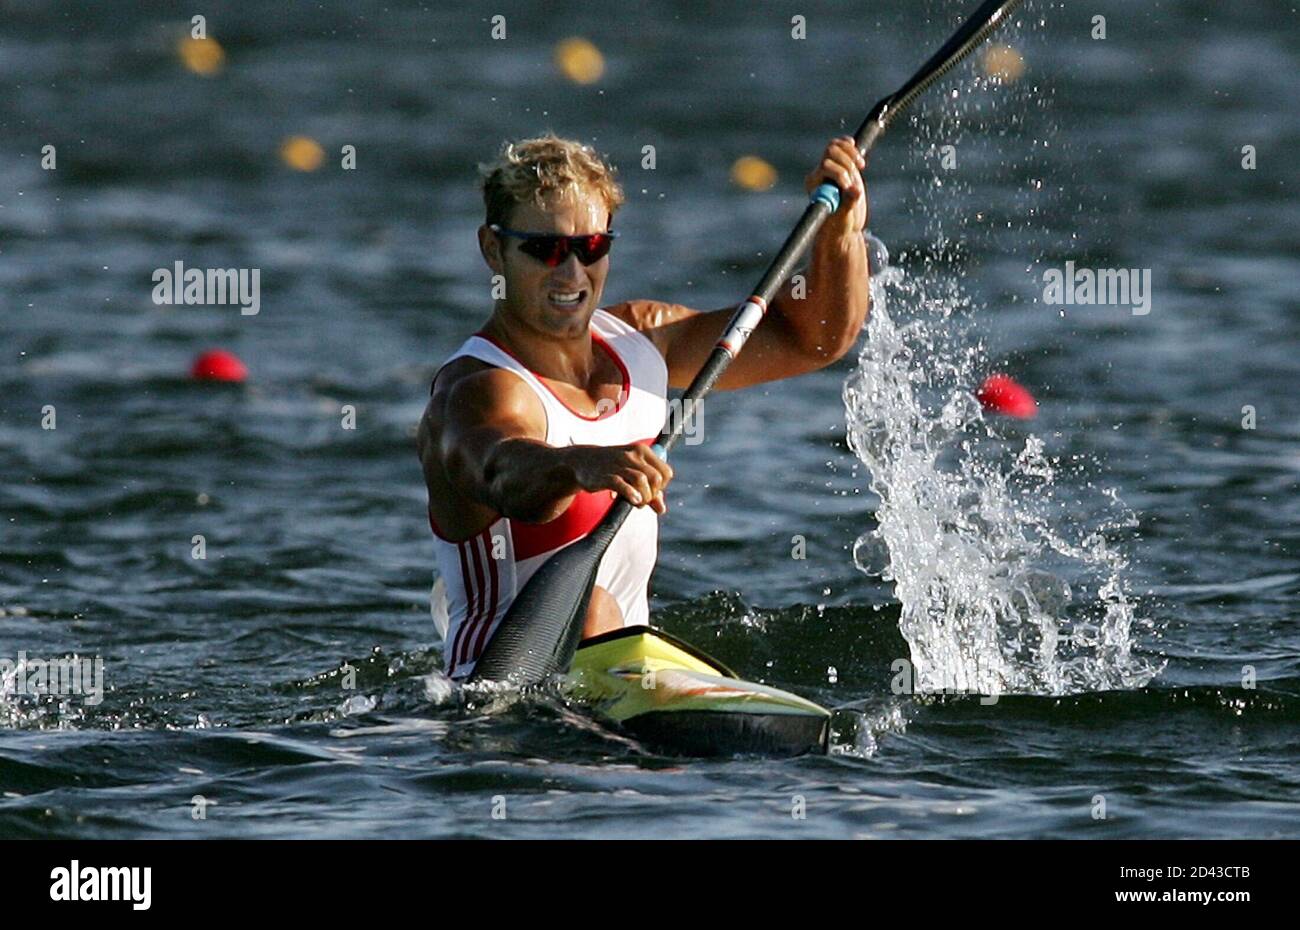 Bjoern Goldschmidt of Germany competes in the semifinals of the men's K1 1000 metres kayak flatwater race during the Athens 2004 Olympic Games August 25, 2004. Stock Photo